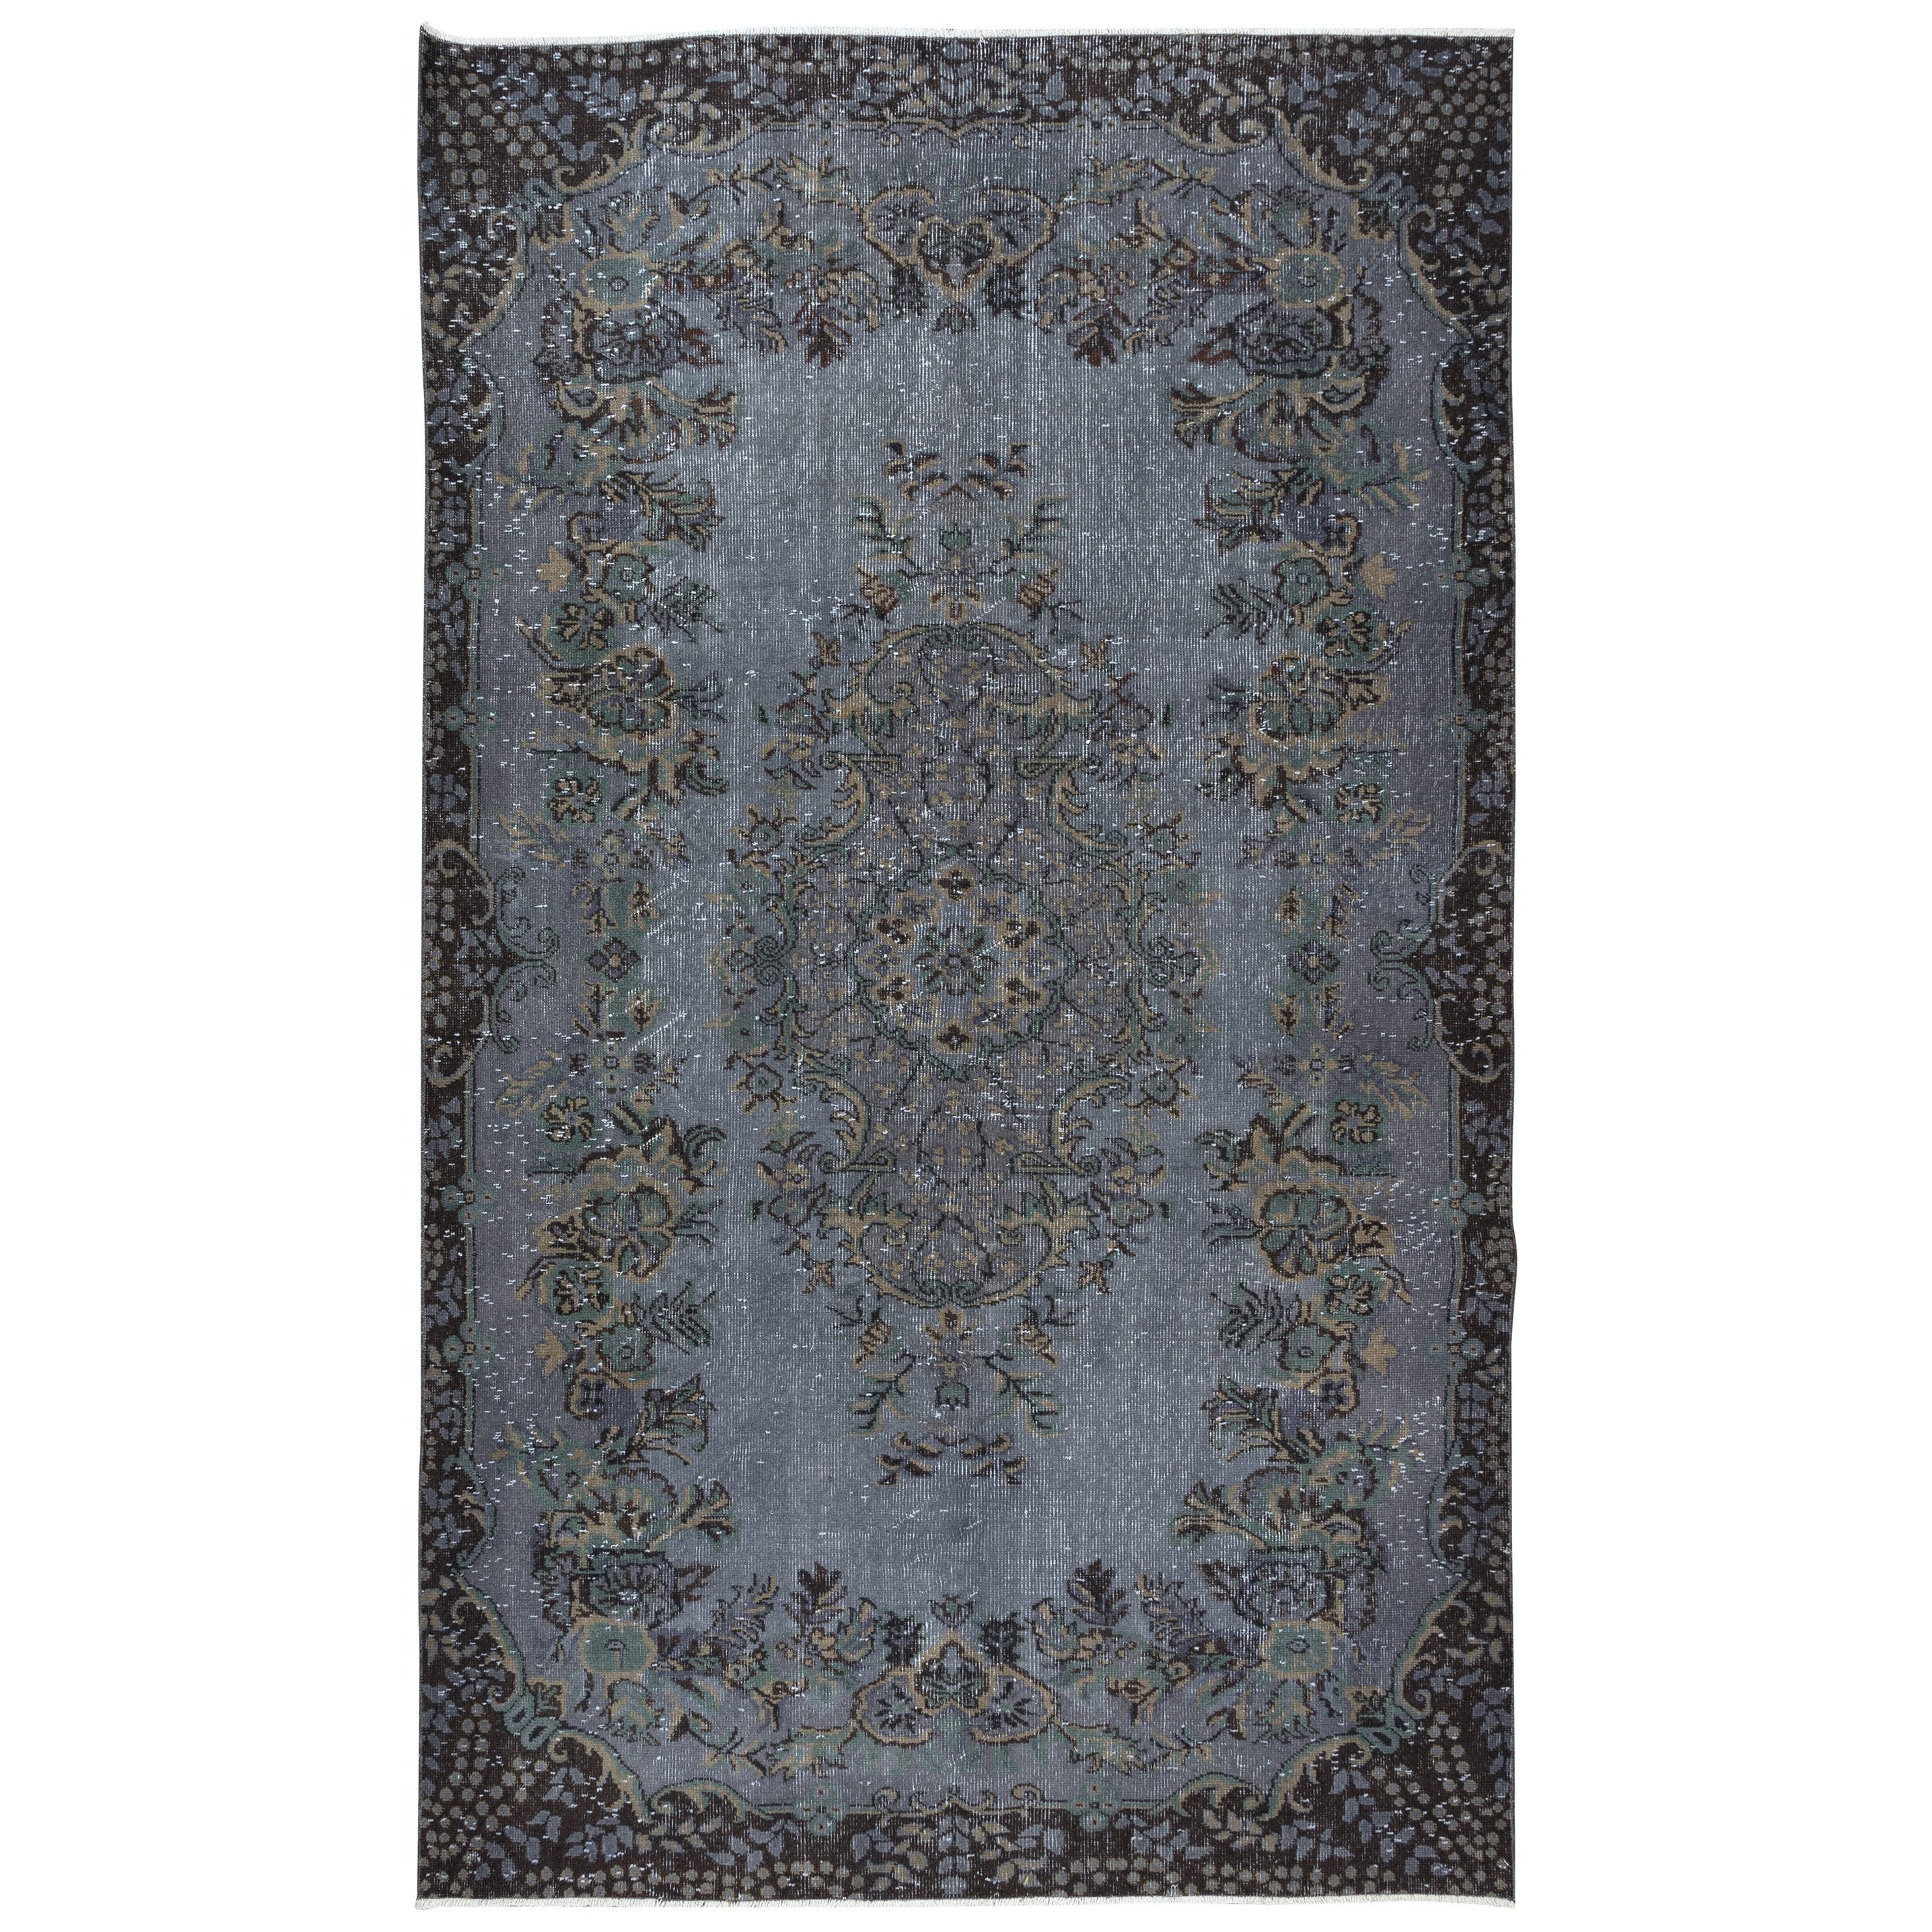 6x10 Ft Decorative Handmade Turkish Modern Wool Rug in Black & Gray Colors For Sale